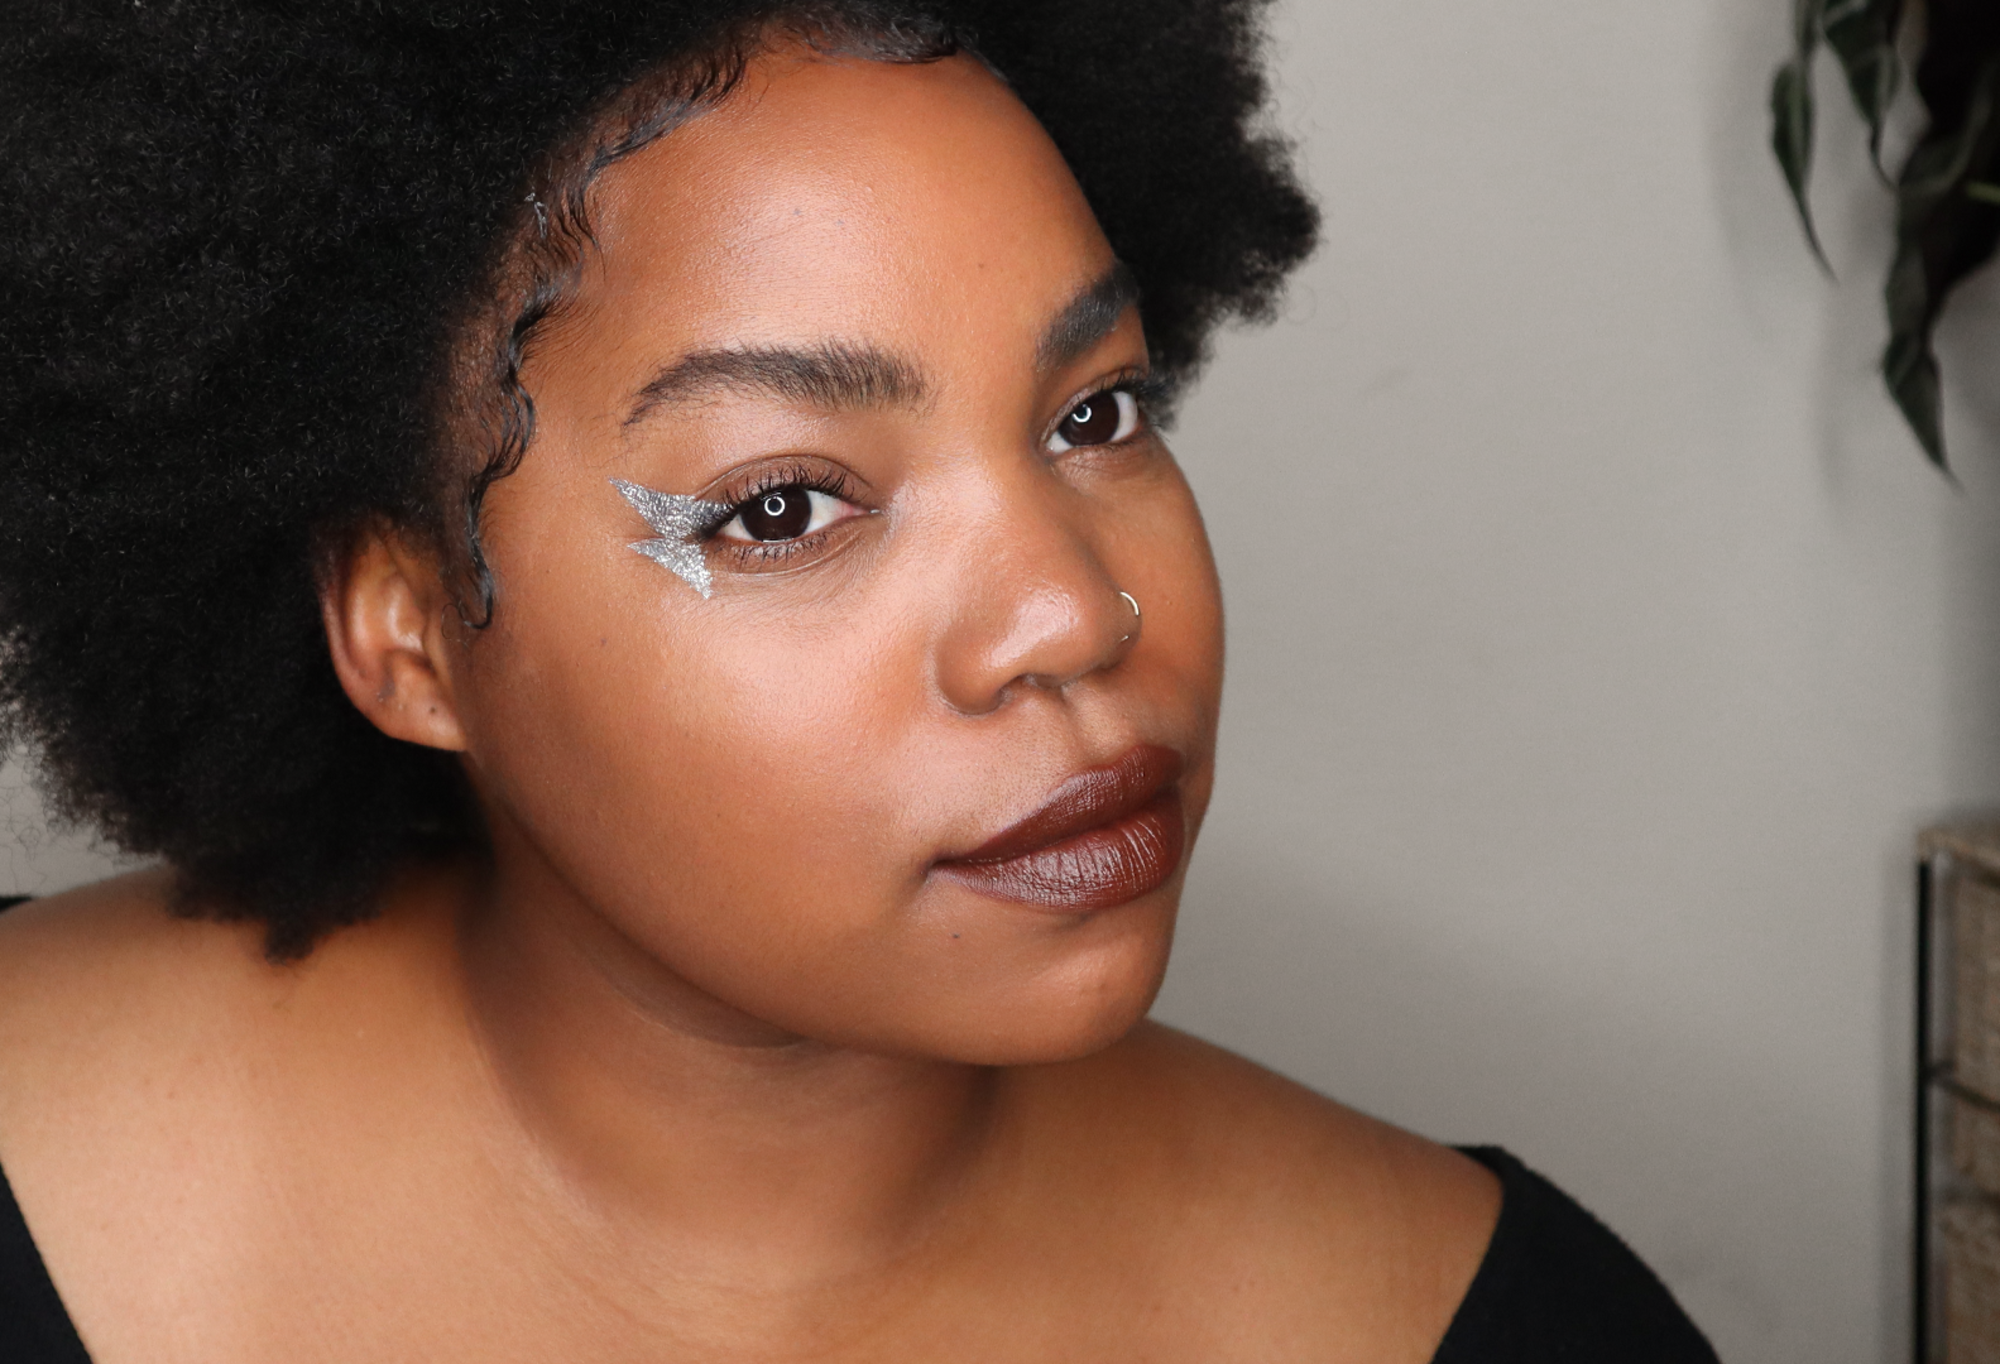 A person with Afro hair and a nose ring looks thoughtful, with a silver lightning bolt painted in the corner of their eye.